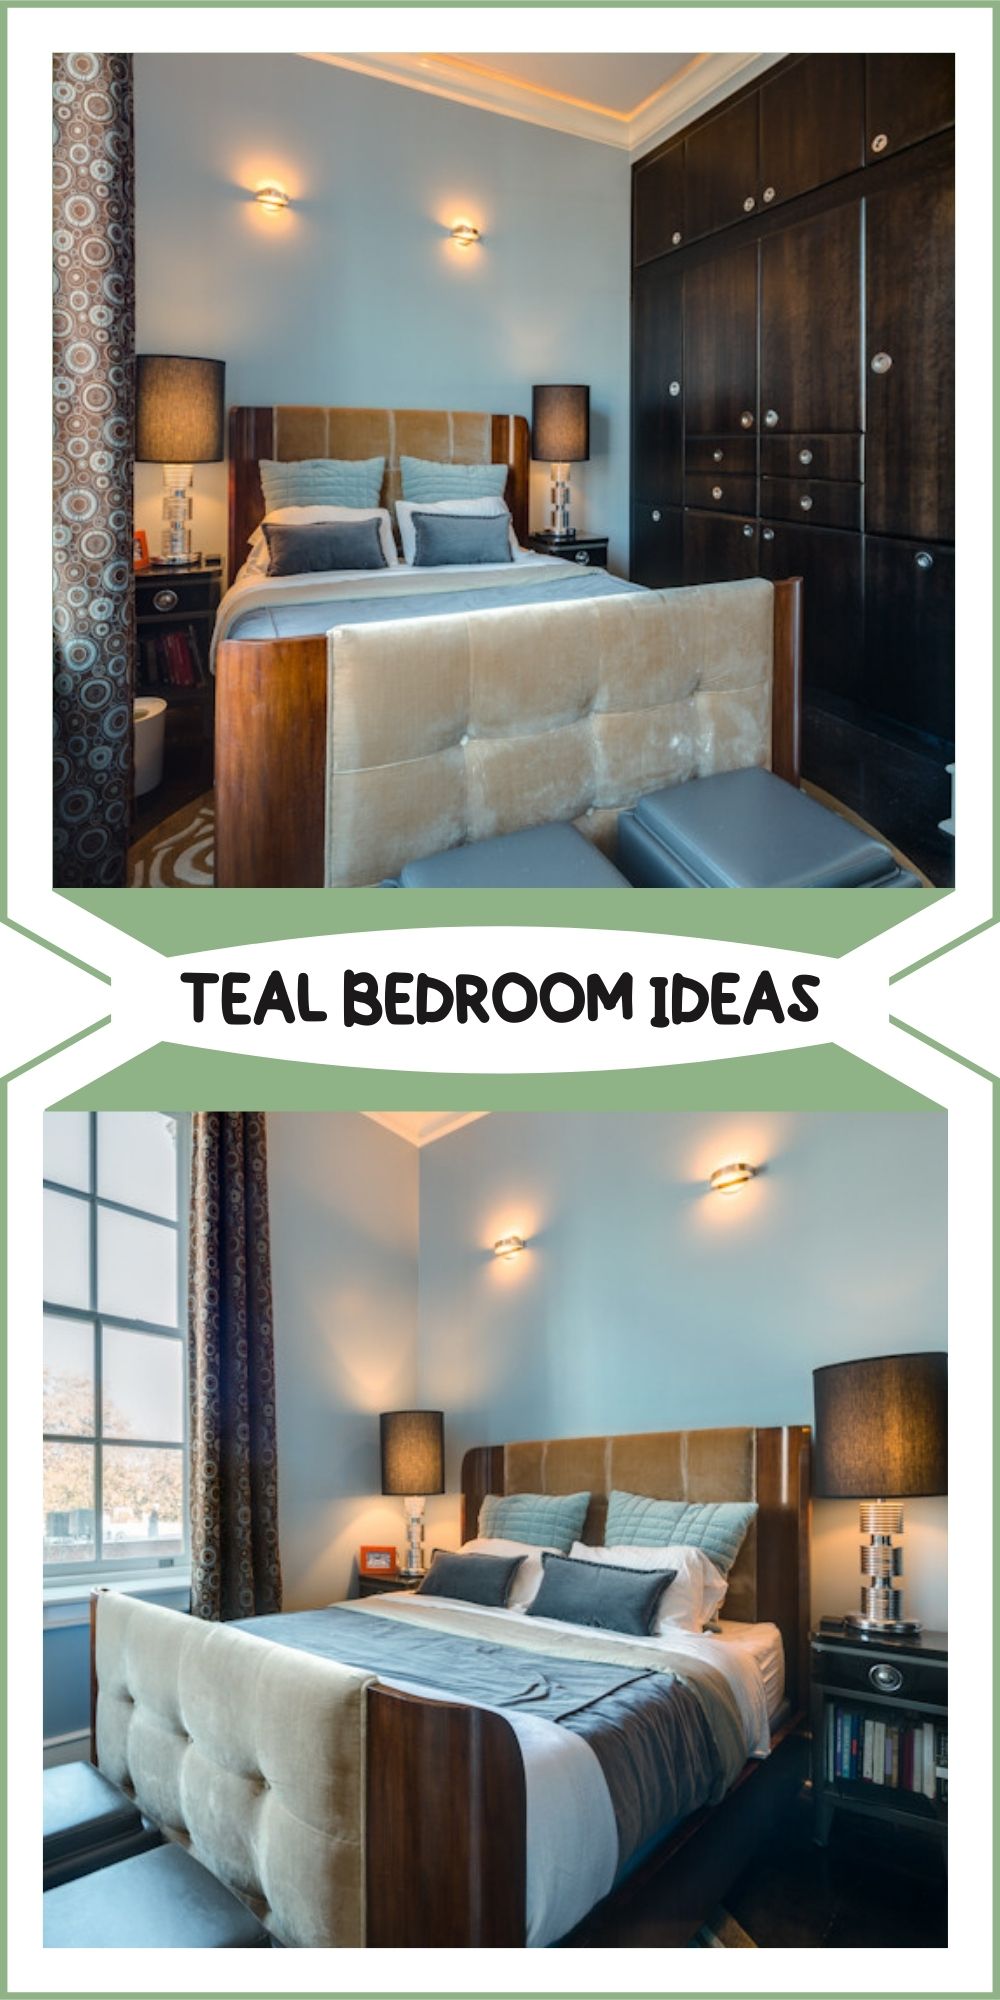 teal and gray bedroom ideas